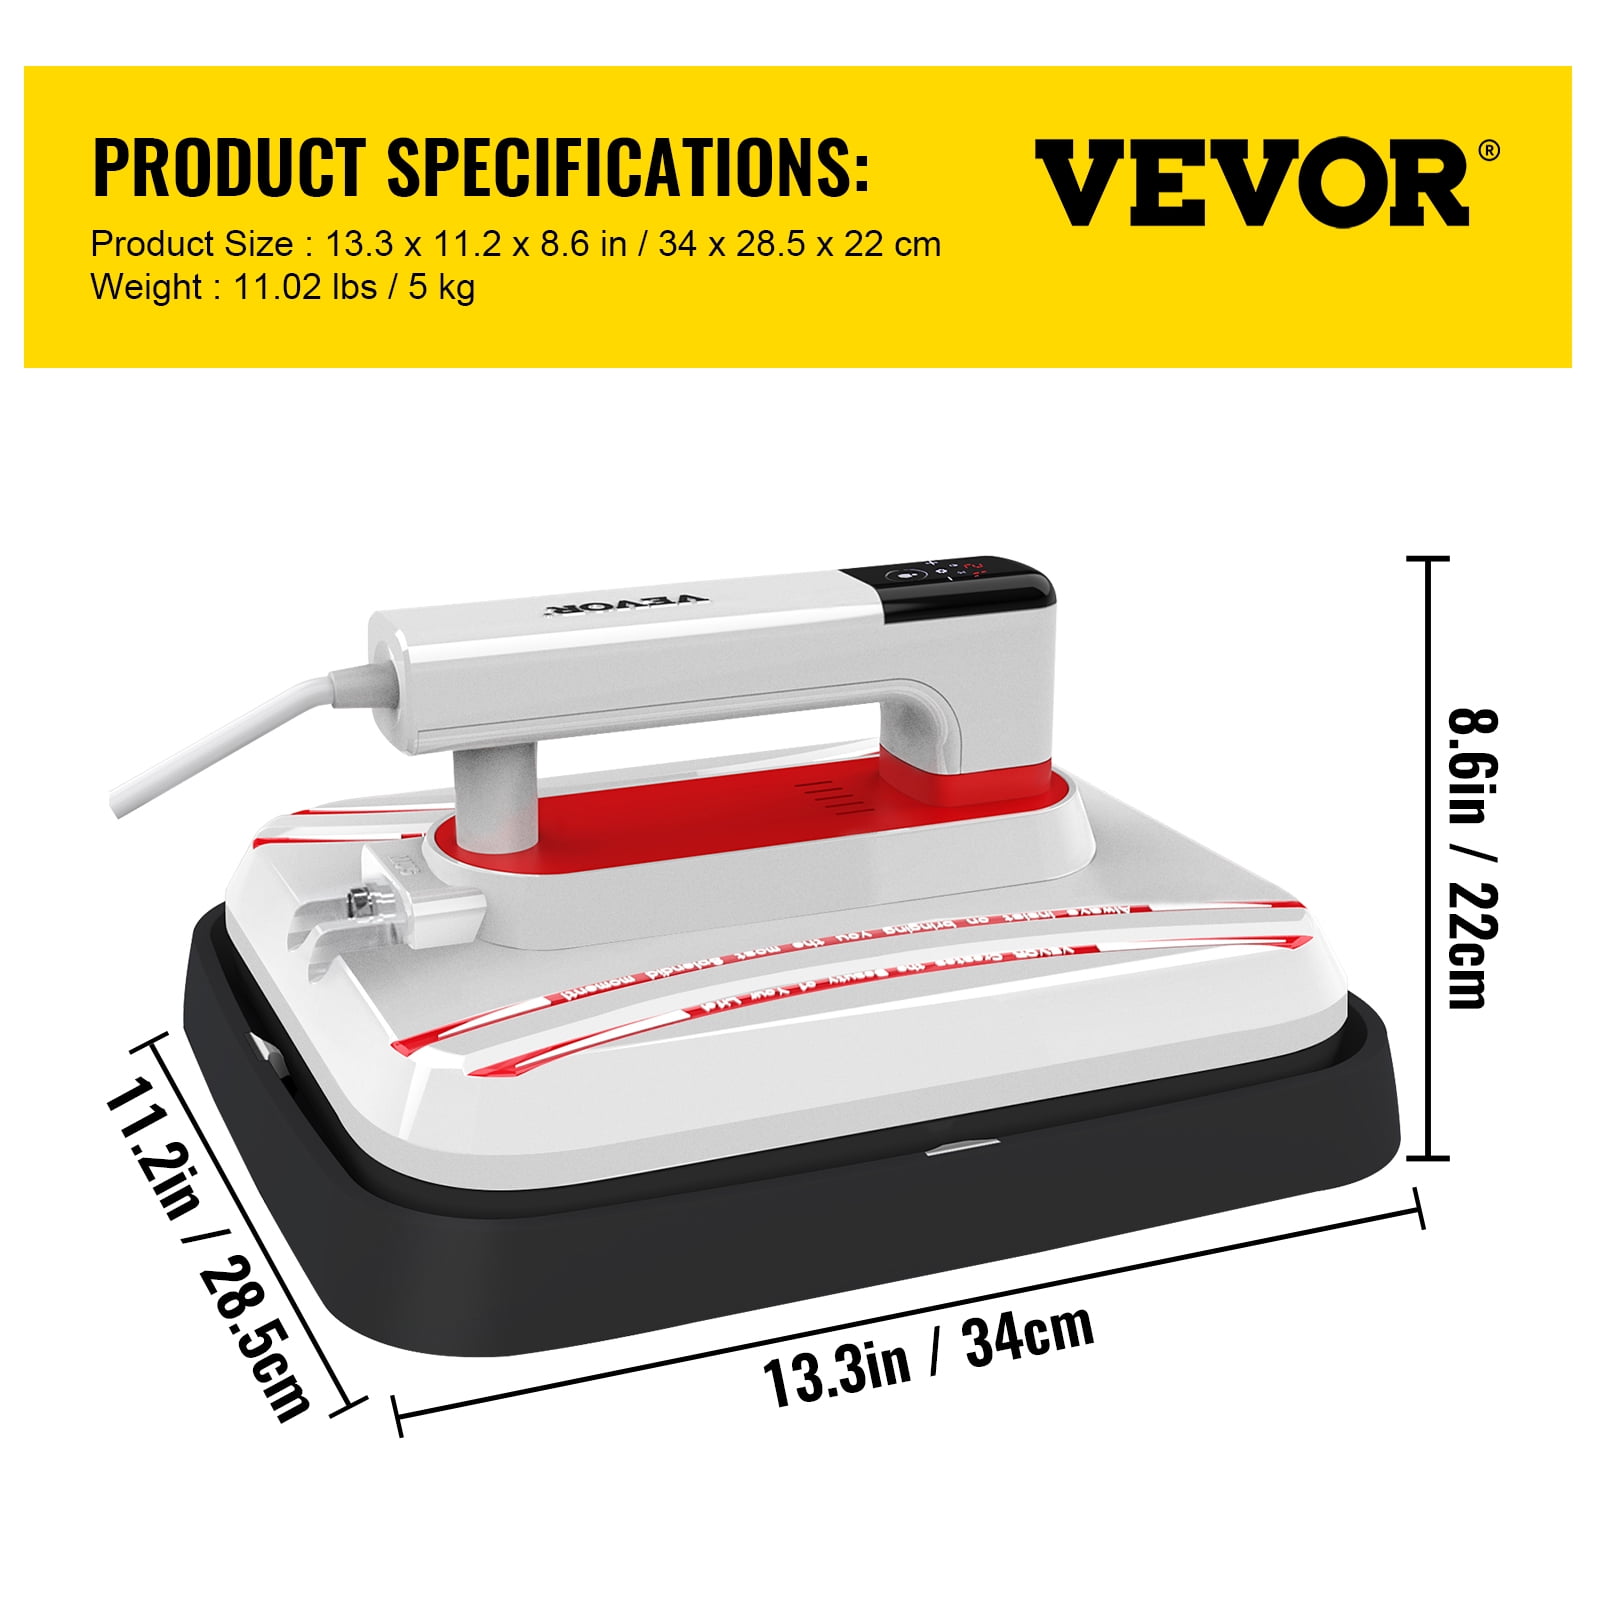 VEVOR Portable Heat Press 12x10 Inch Easy Press 800W Mini Heat Press Three Adjustable Modes Automatic Heat Press Machine for T Shirts Bags and Small HTV Vinyl Projects Red 